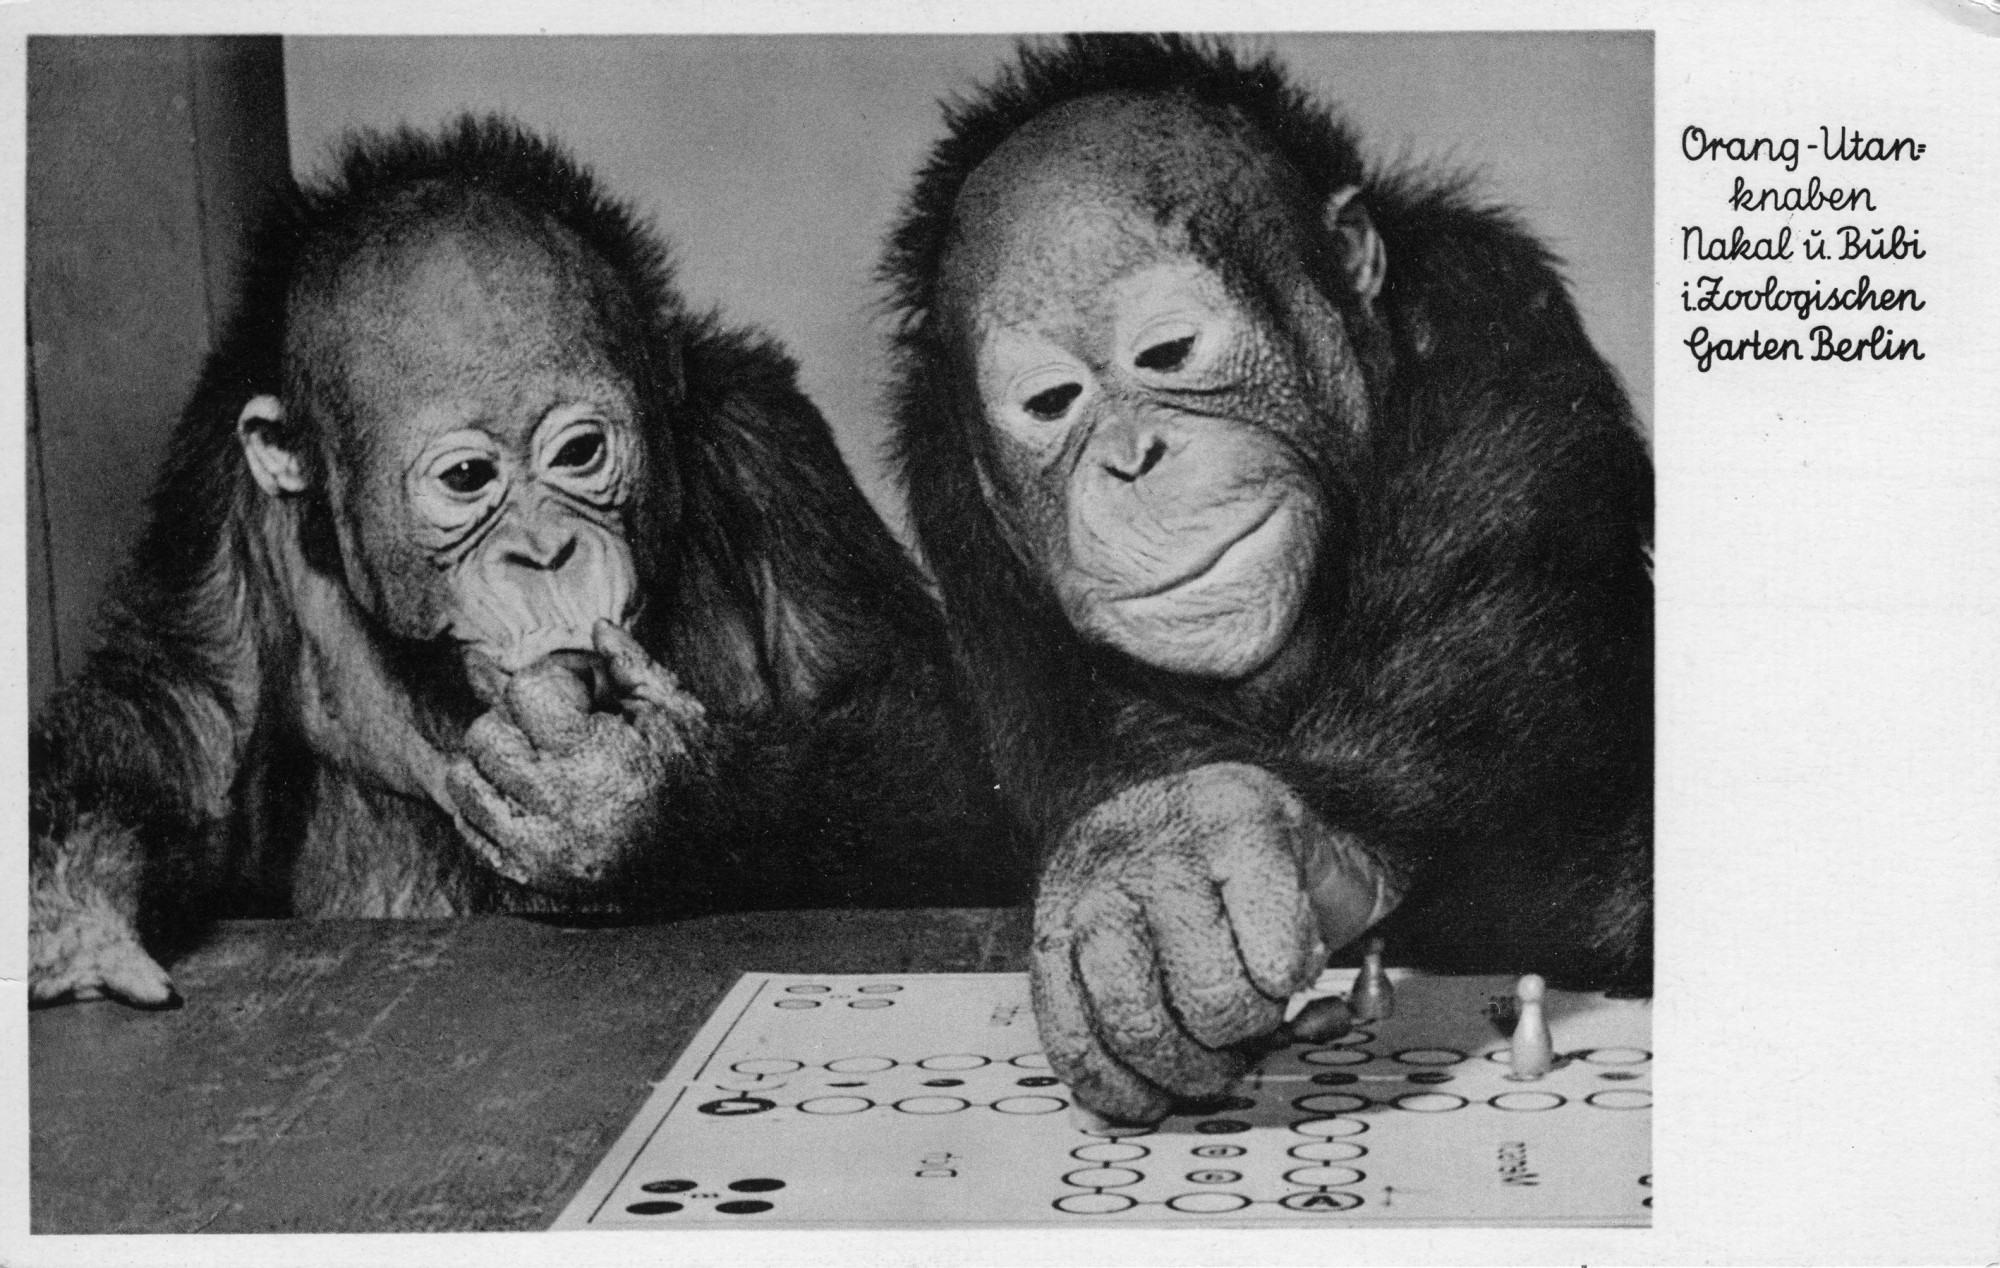 Black and white postcard. Text: Orang-Utanknaben Nakal u. Bubi i. Zoologischen Garten Berlin. Image: Ape on the left, touching his mouth with his hand, looking at a board game. Ape on the right moves a token on the board.